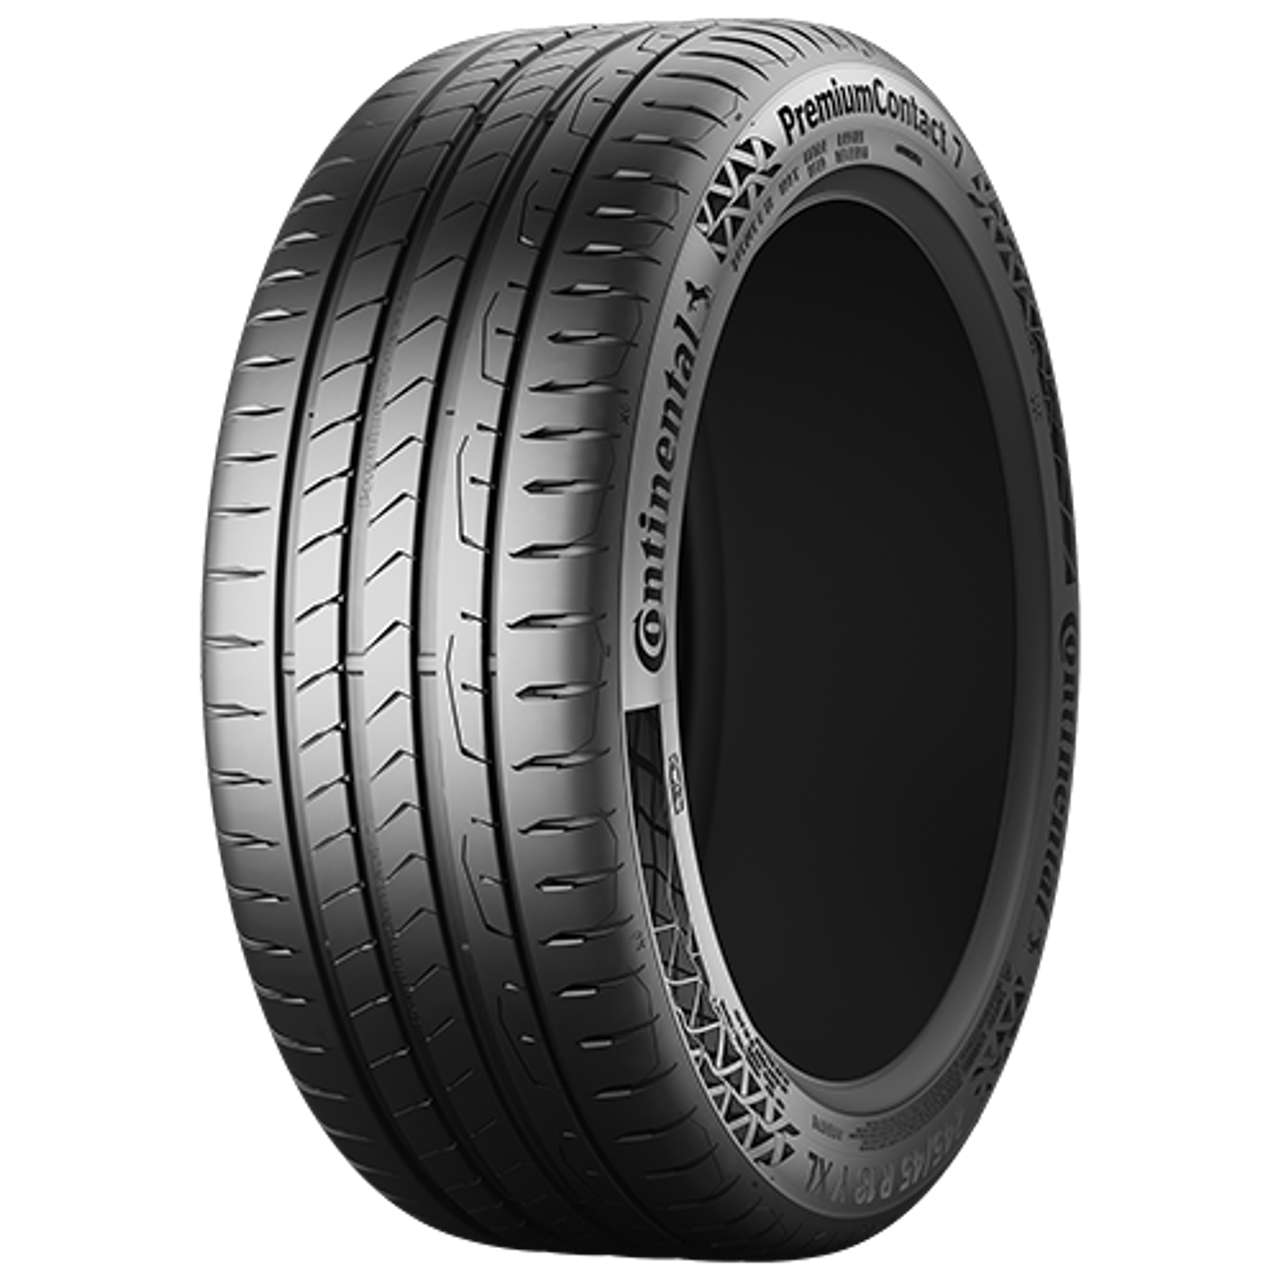 CONTINENTAL PREMIUMCONTACT 7 (EVc) 225/45R17 91Y BSW